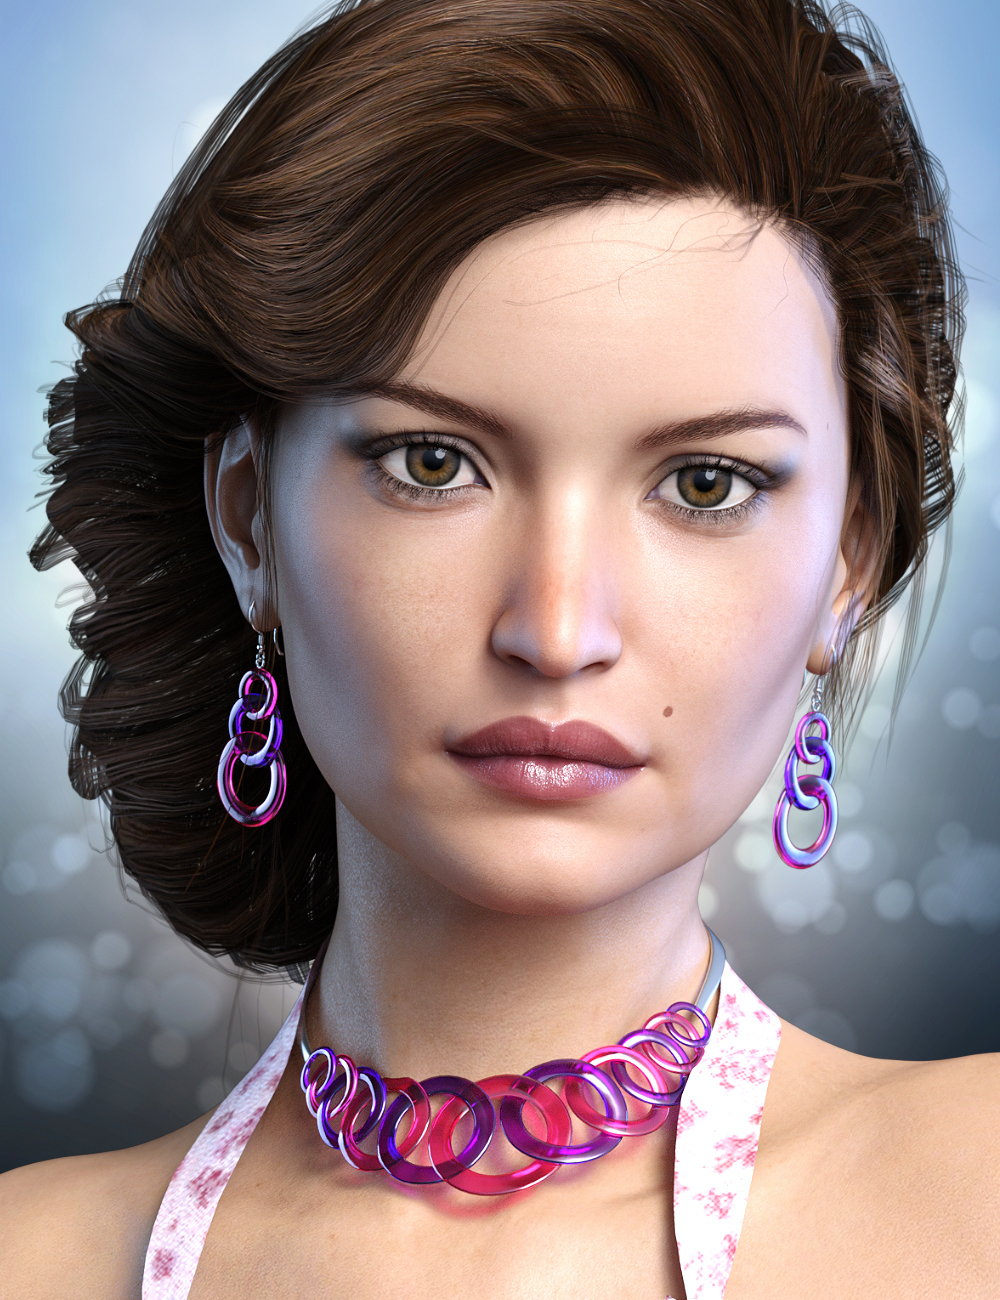 FWSA Monika HD for Victoria 7 and Her Jewelry by: Fred Winkler ArtSabbyFisty & Darc, 3D Models by Daz 3D